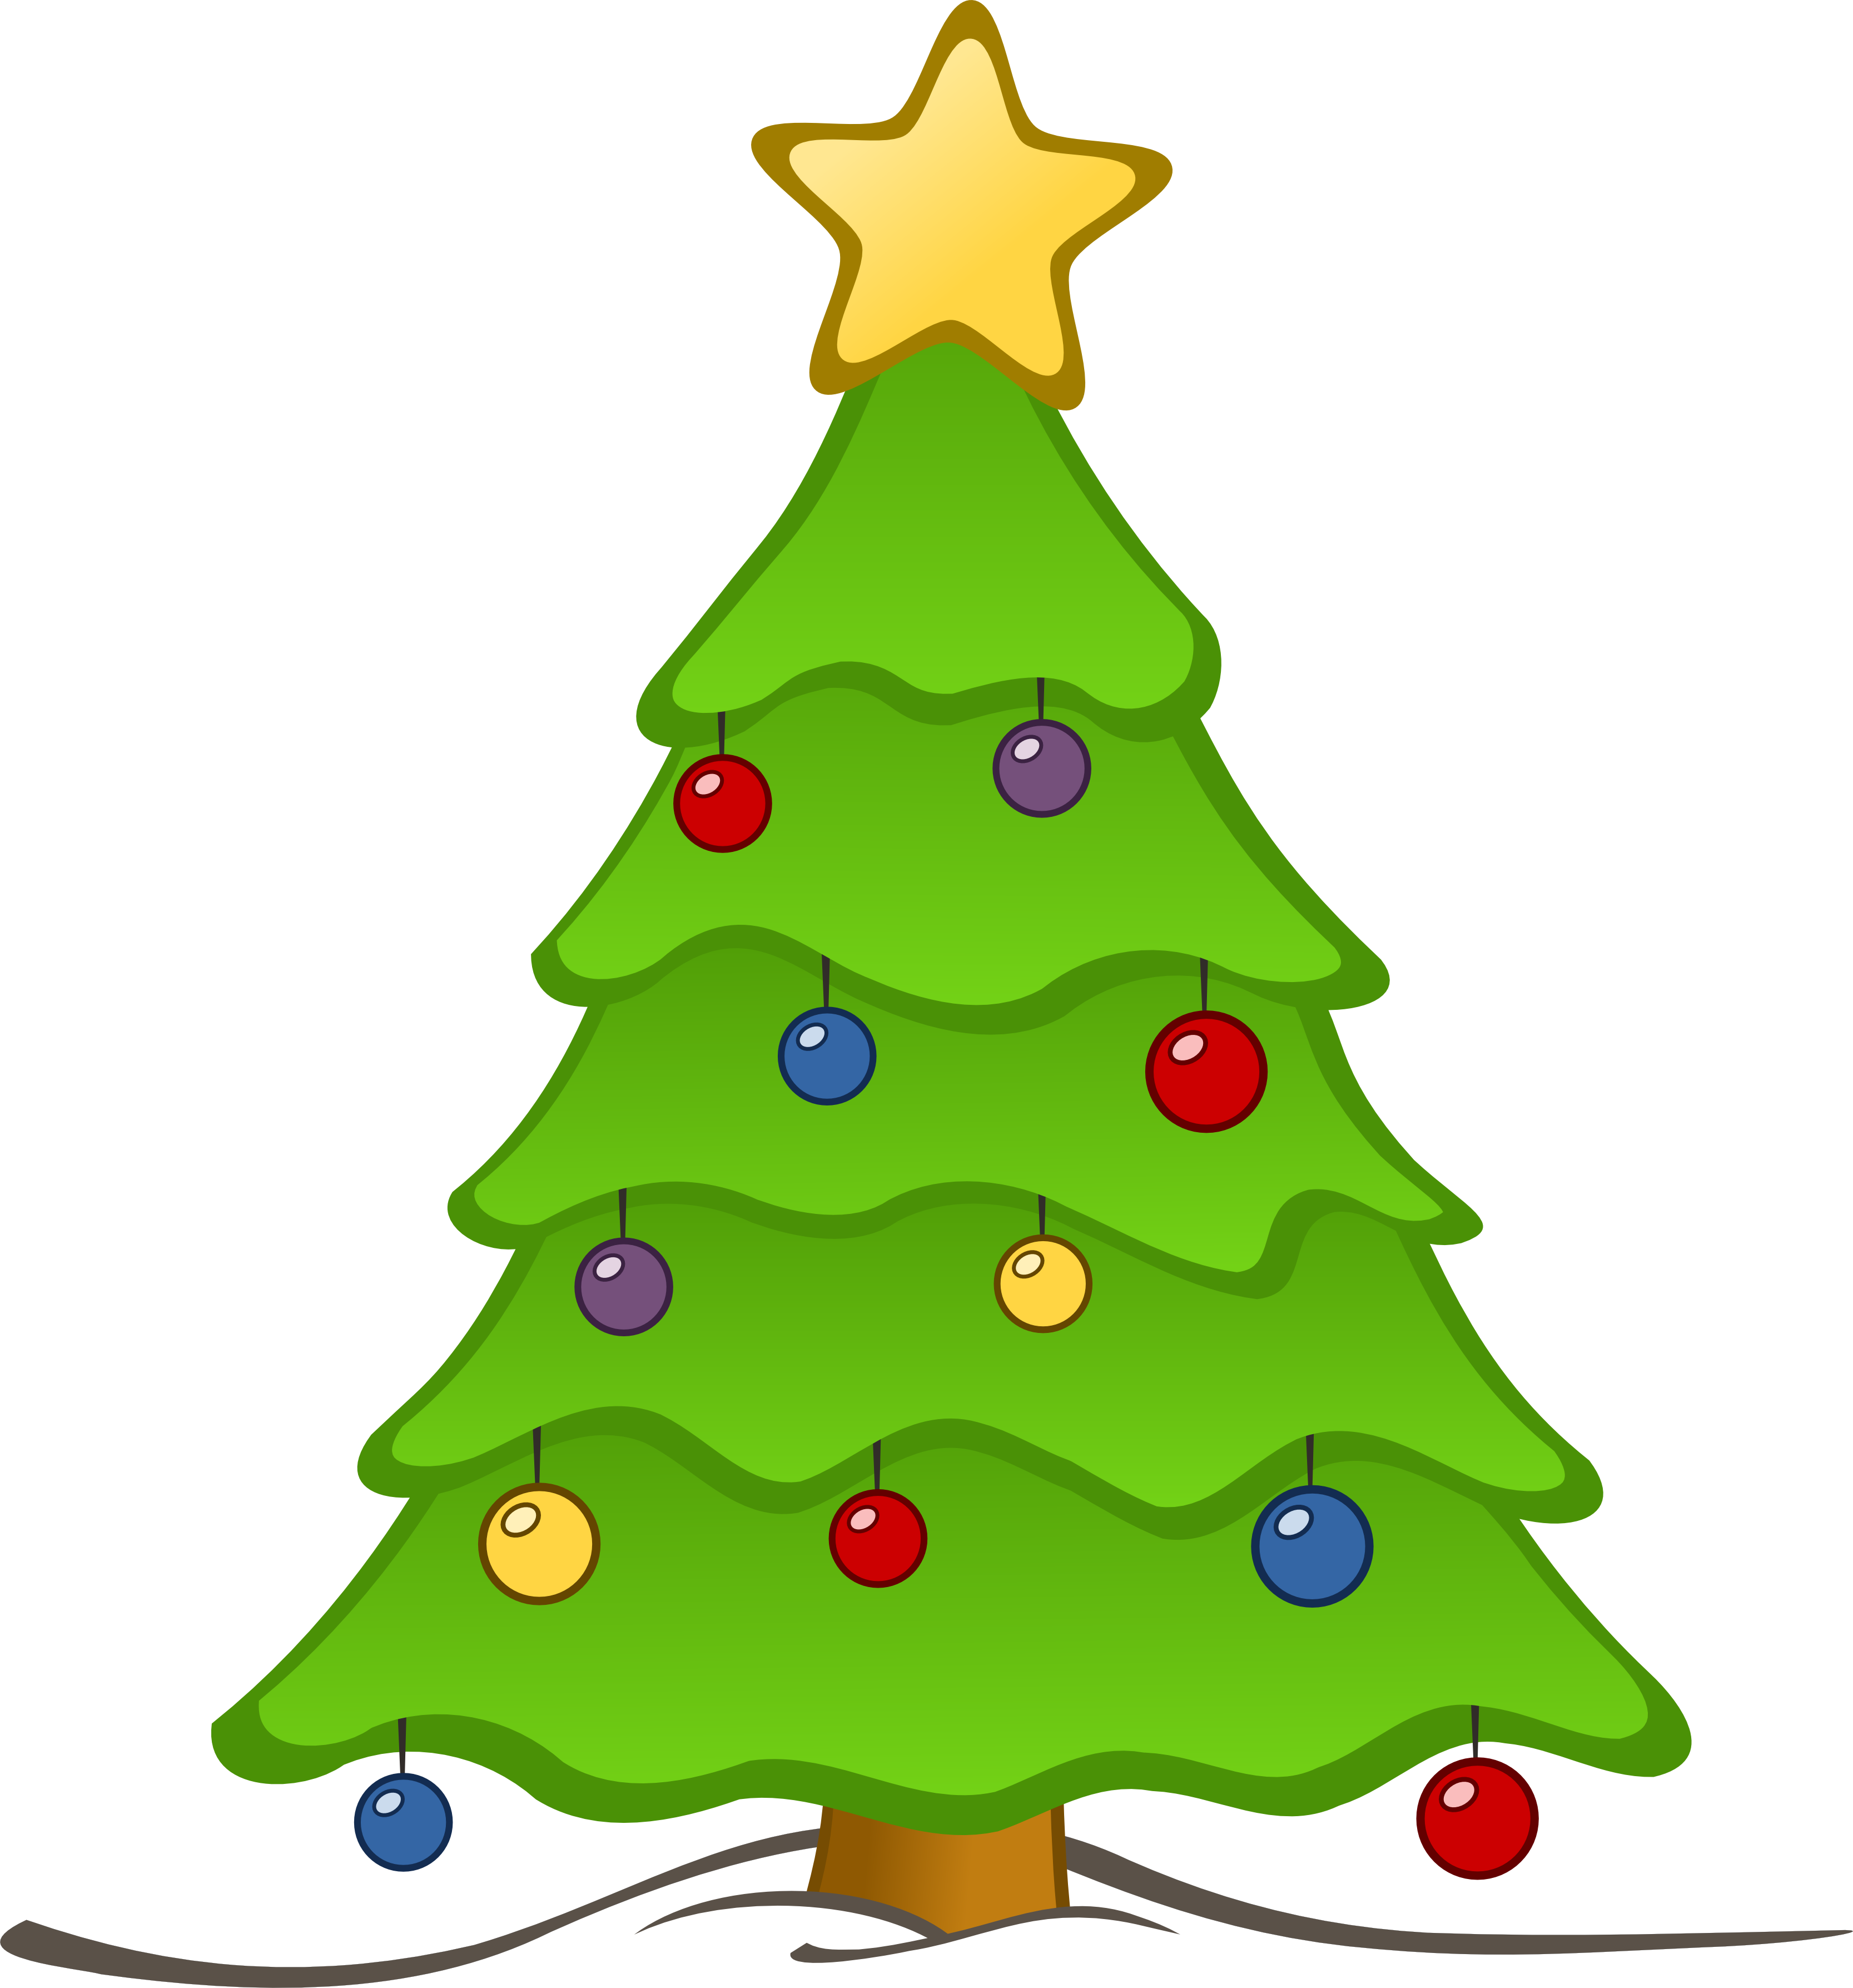 Tree clip art free. Email clipart christmas